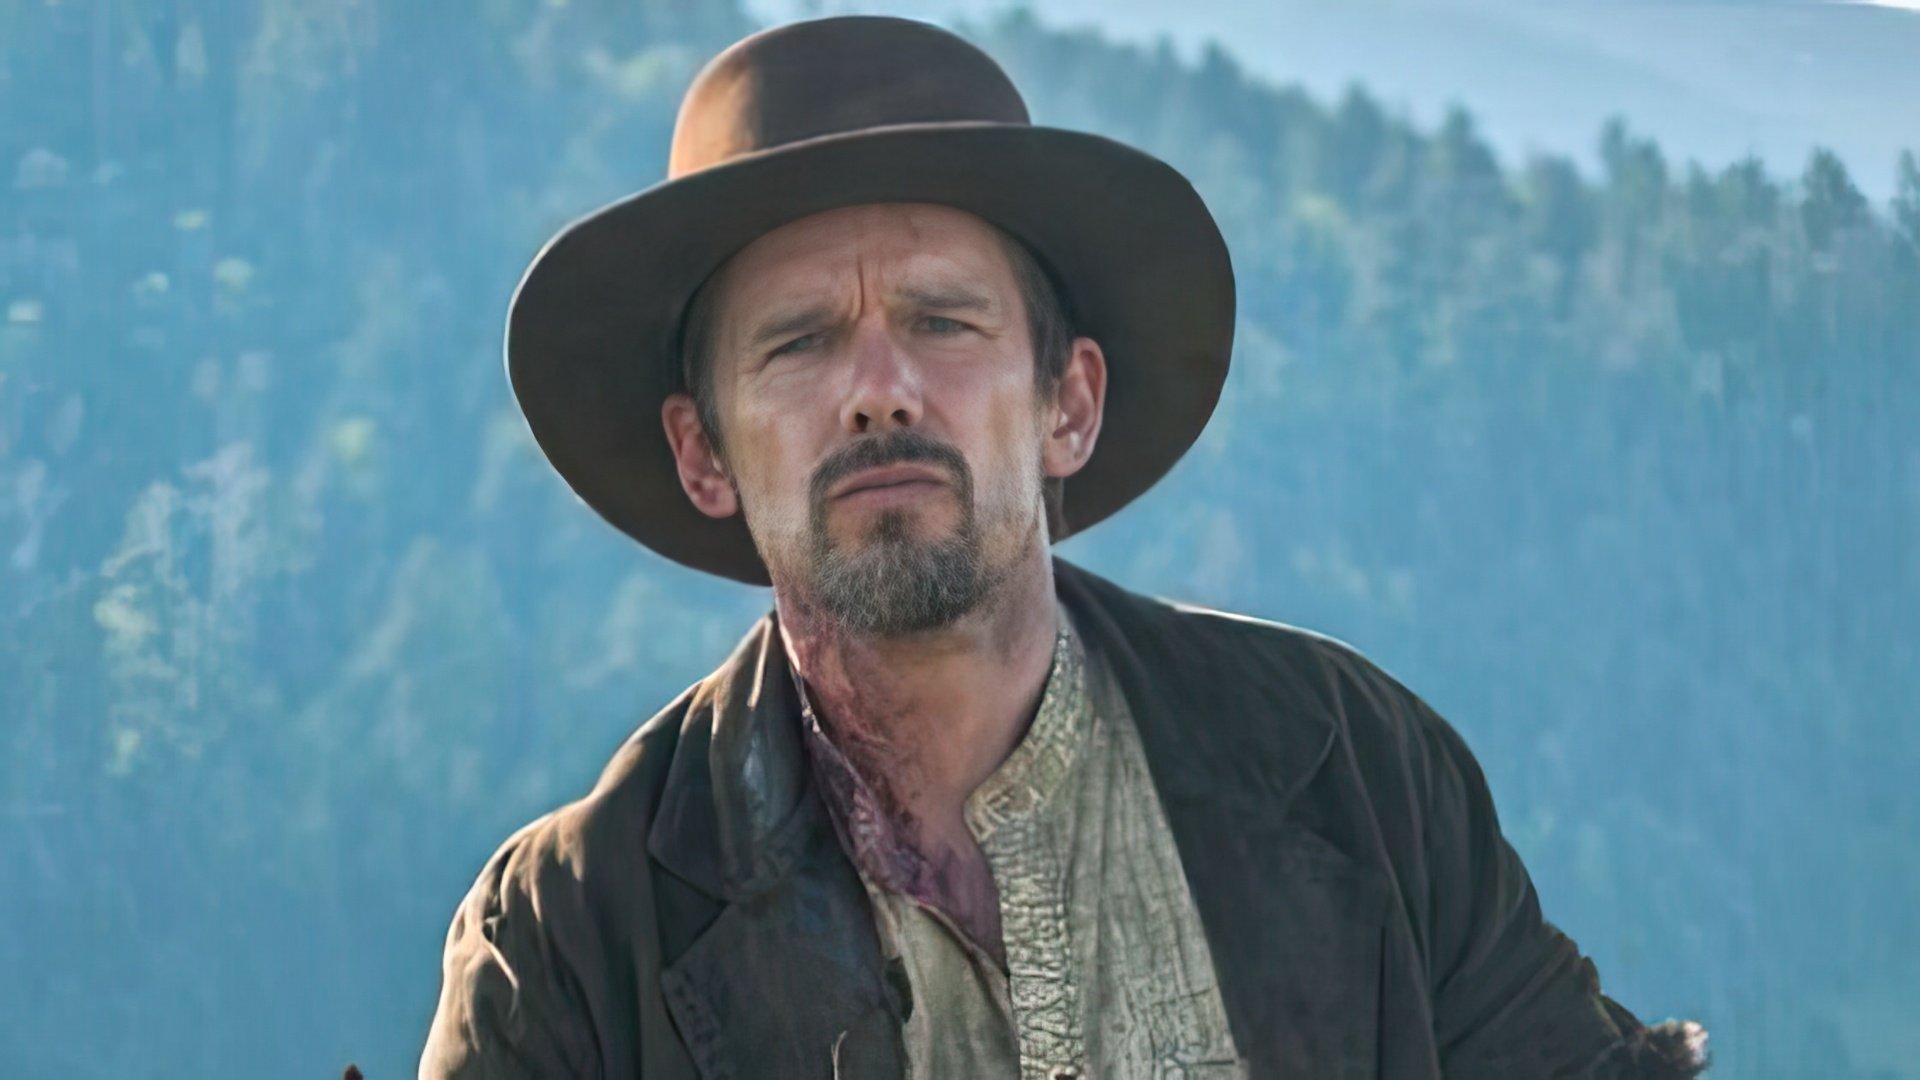 The Magnificent Seven: Ethan Hawke in the role of a brave cowboy